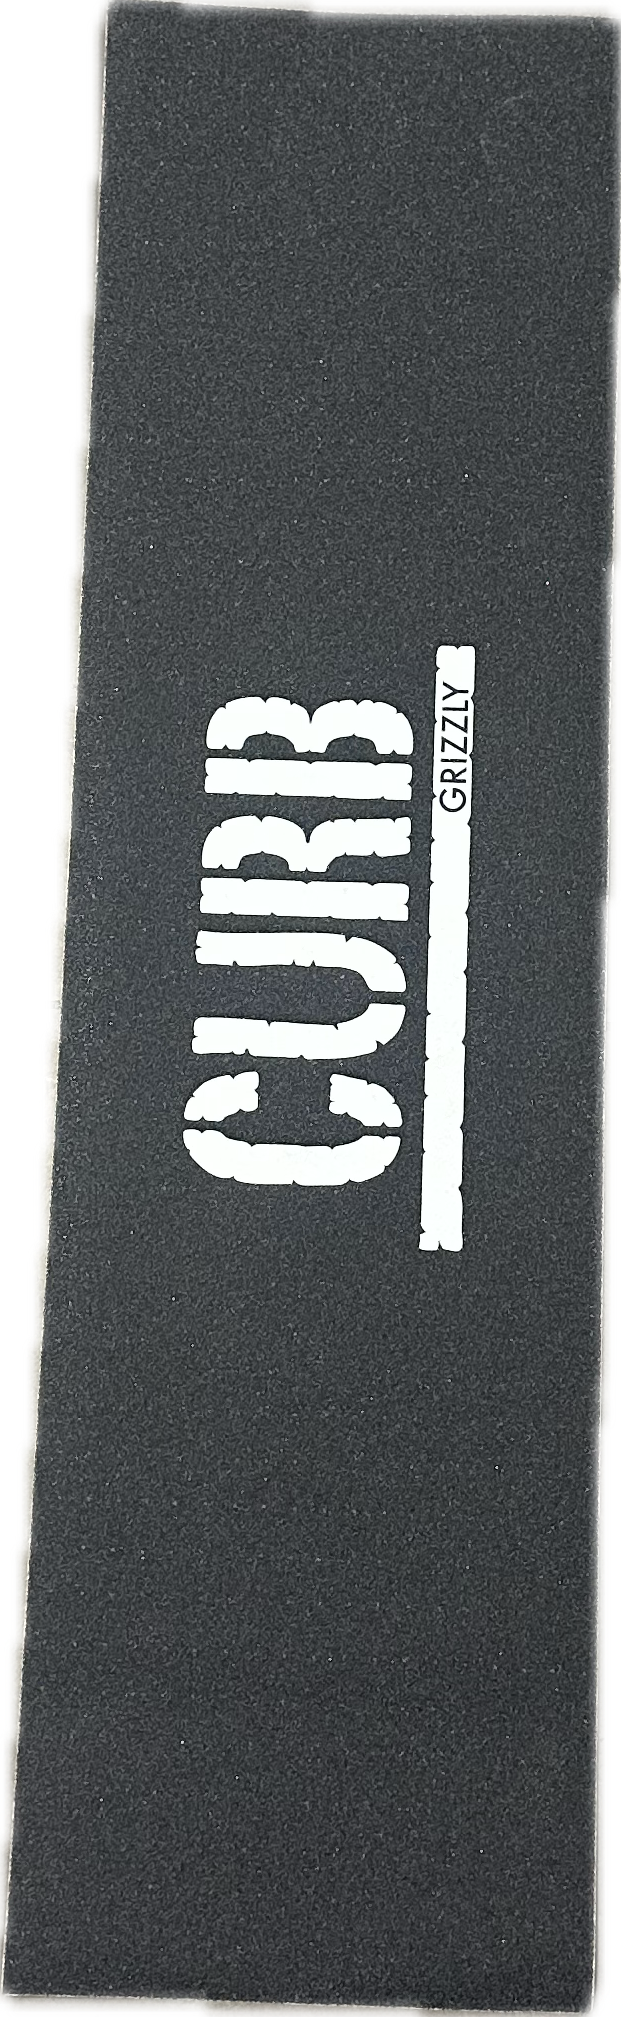 Grizzly x Curb Stamp Griptape